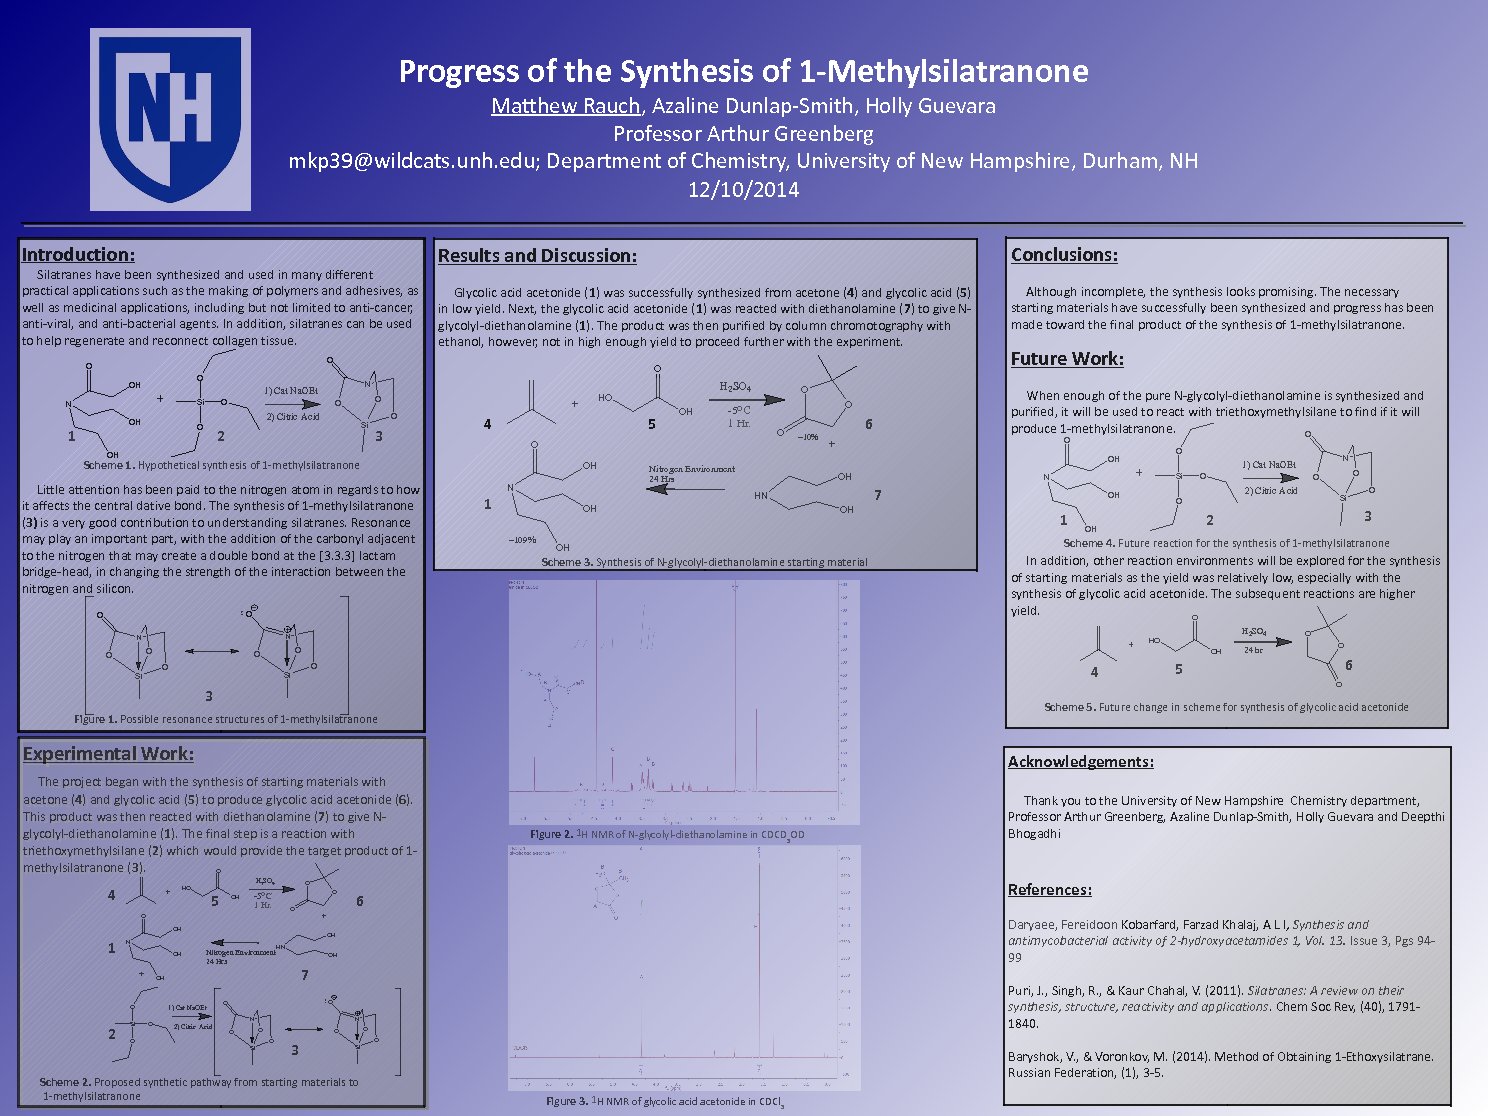 Progress Of The Synthesis Of 1-Methylsilatranone by mkp39